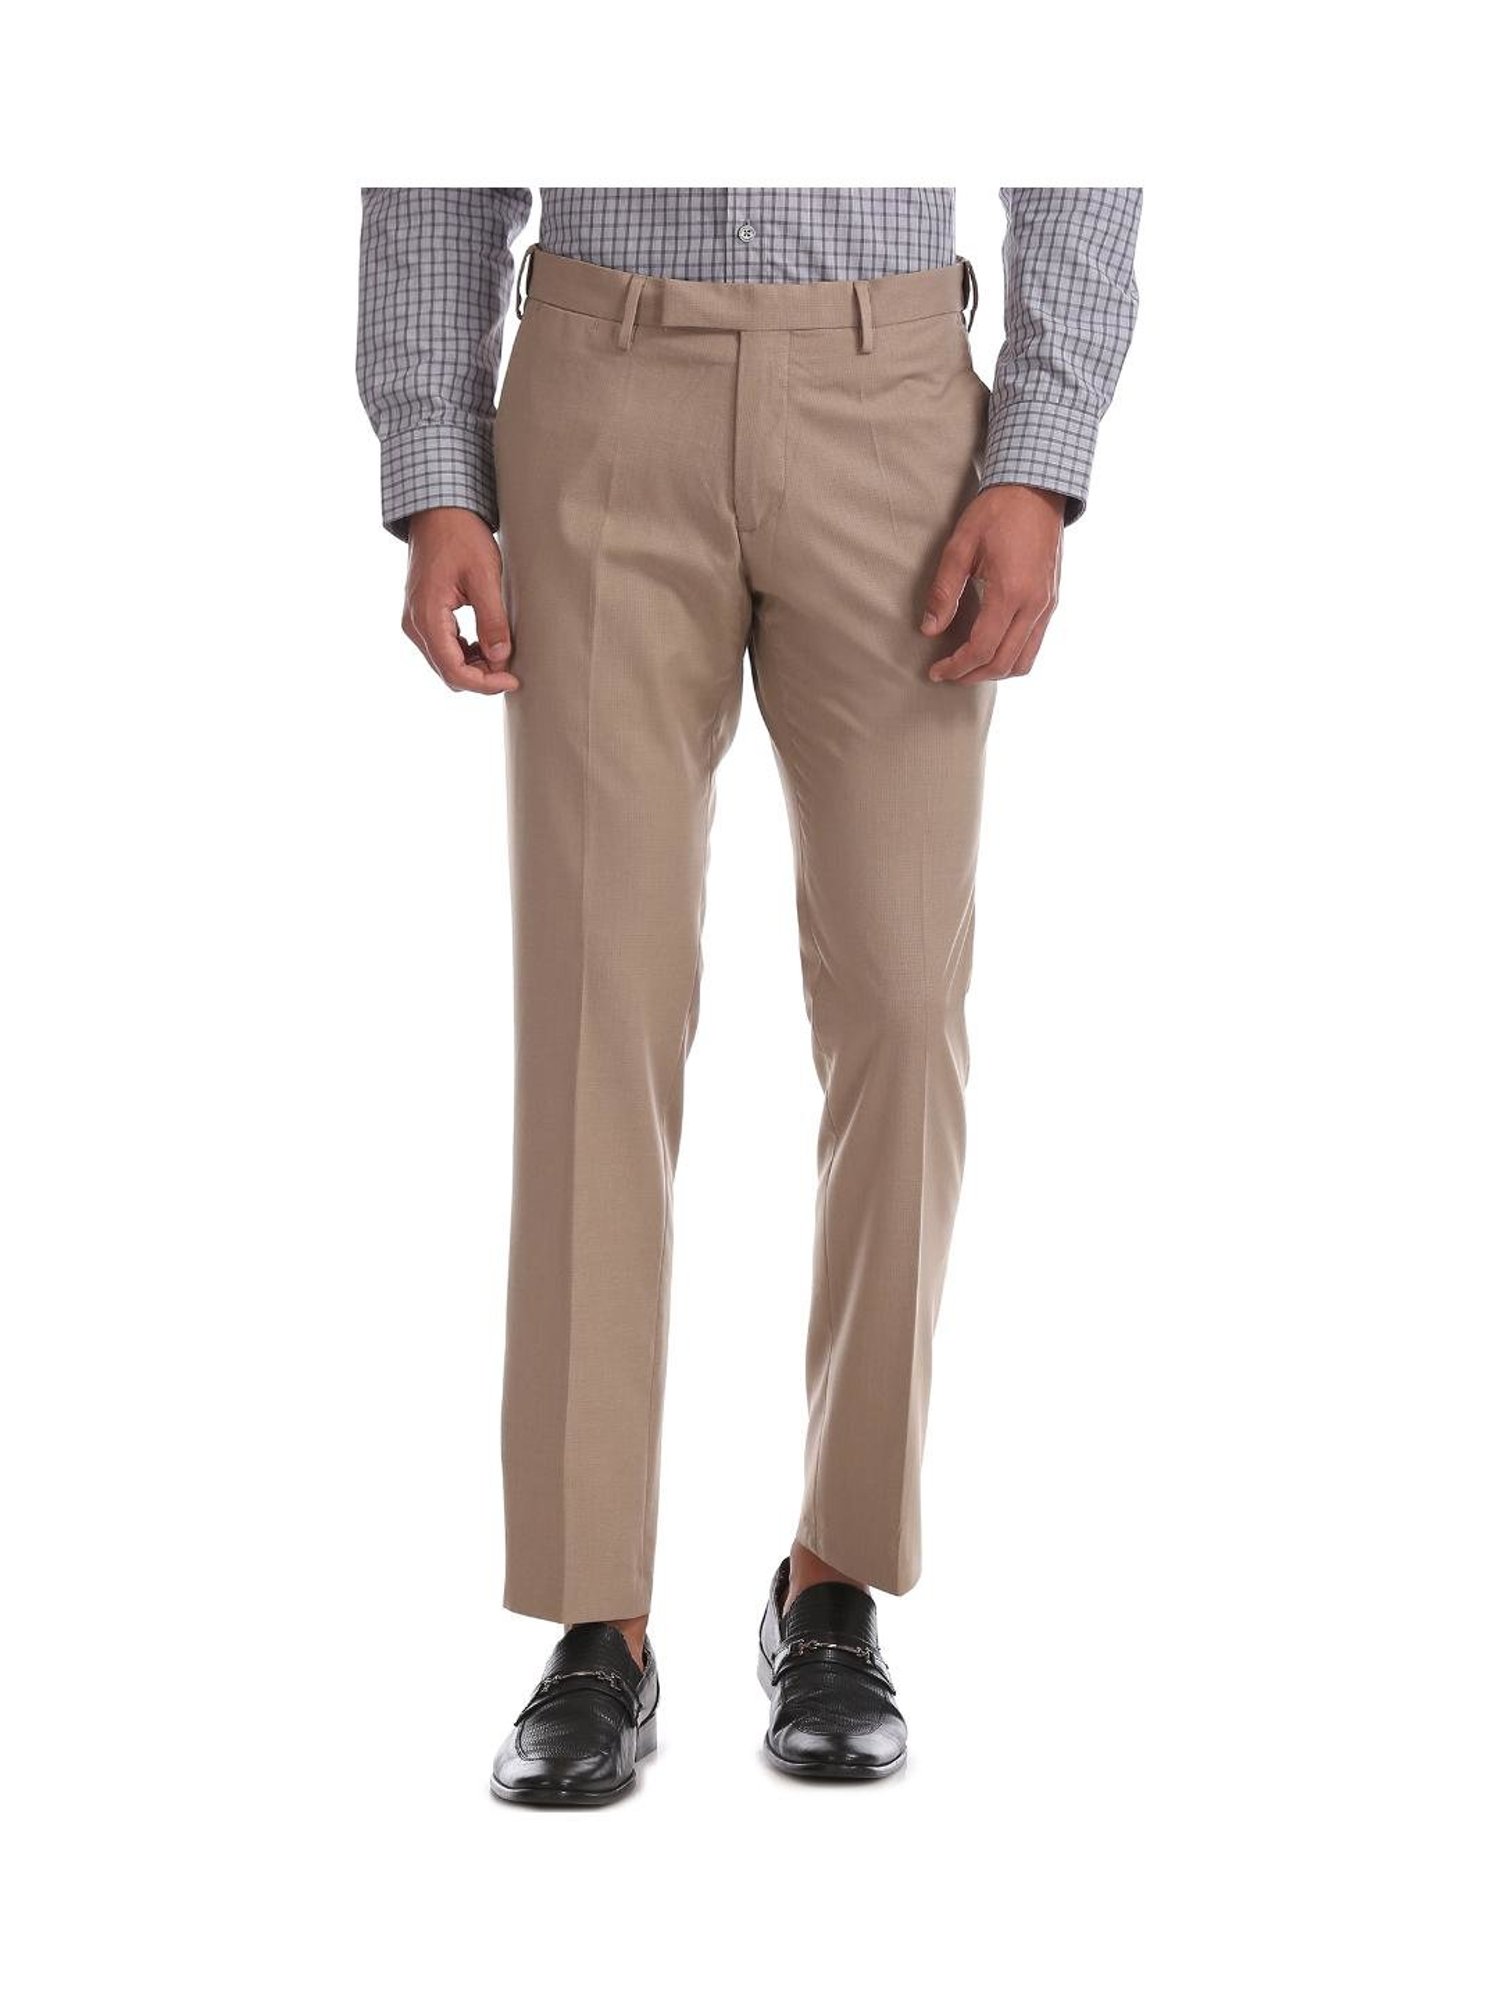 Buy Beige Slim Fit Suit Trousers for Men at SELECTED HOMME  250869601